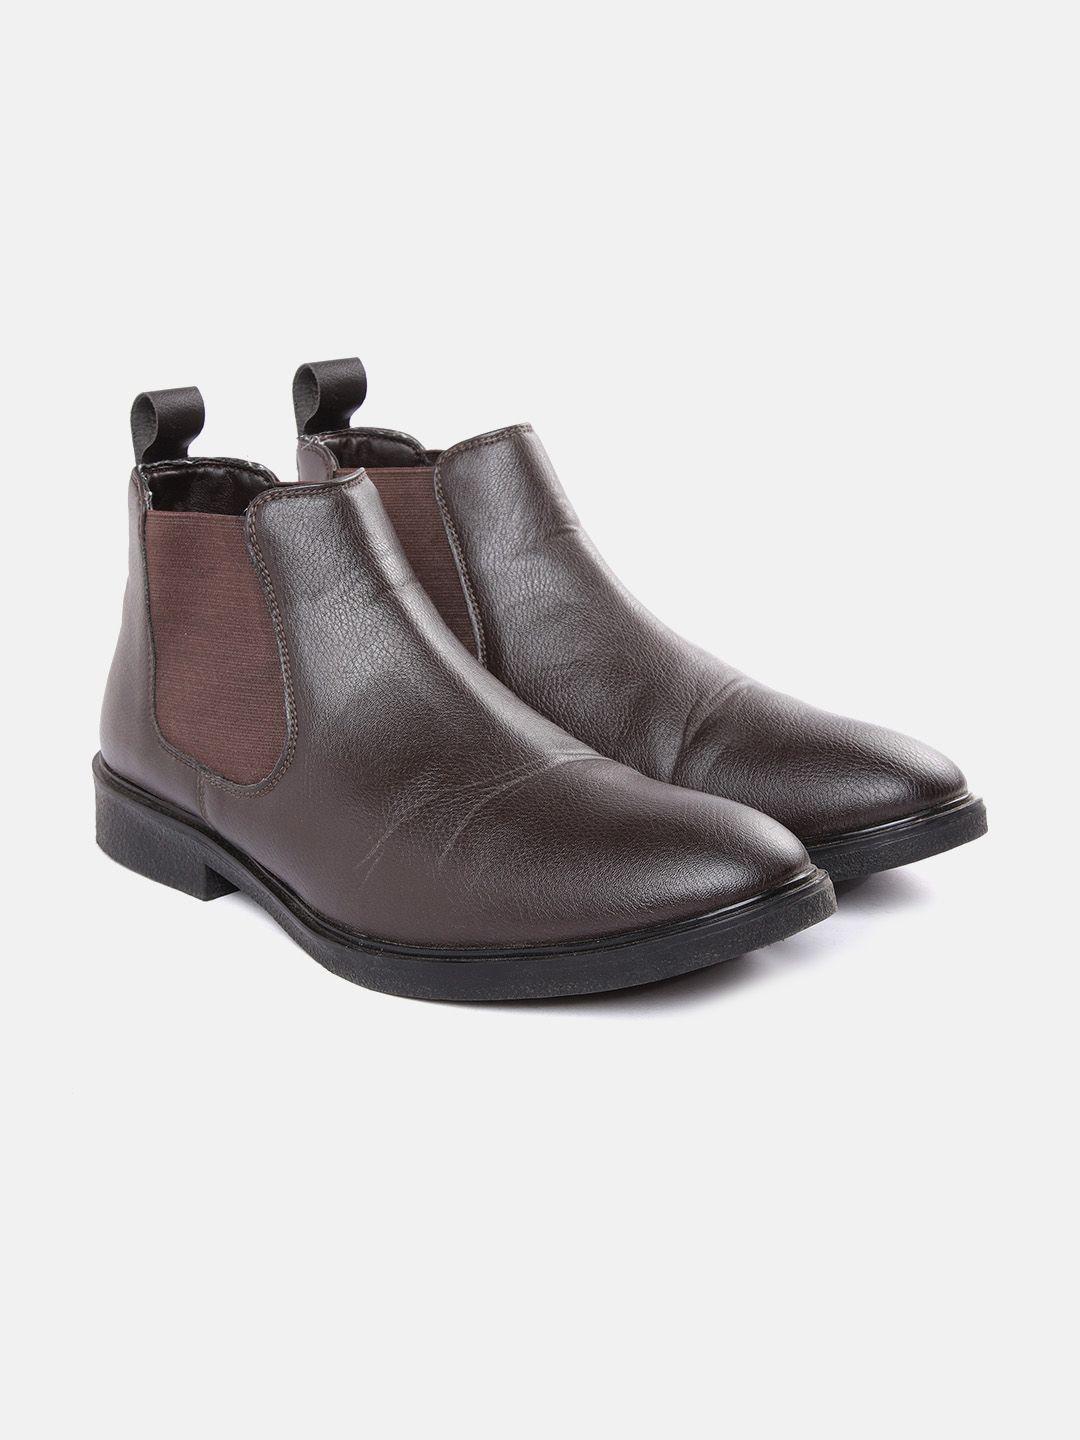 carlton-london-men-coffee-brown-solid-mid-top-flat-chelsea-boots